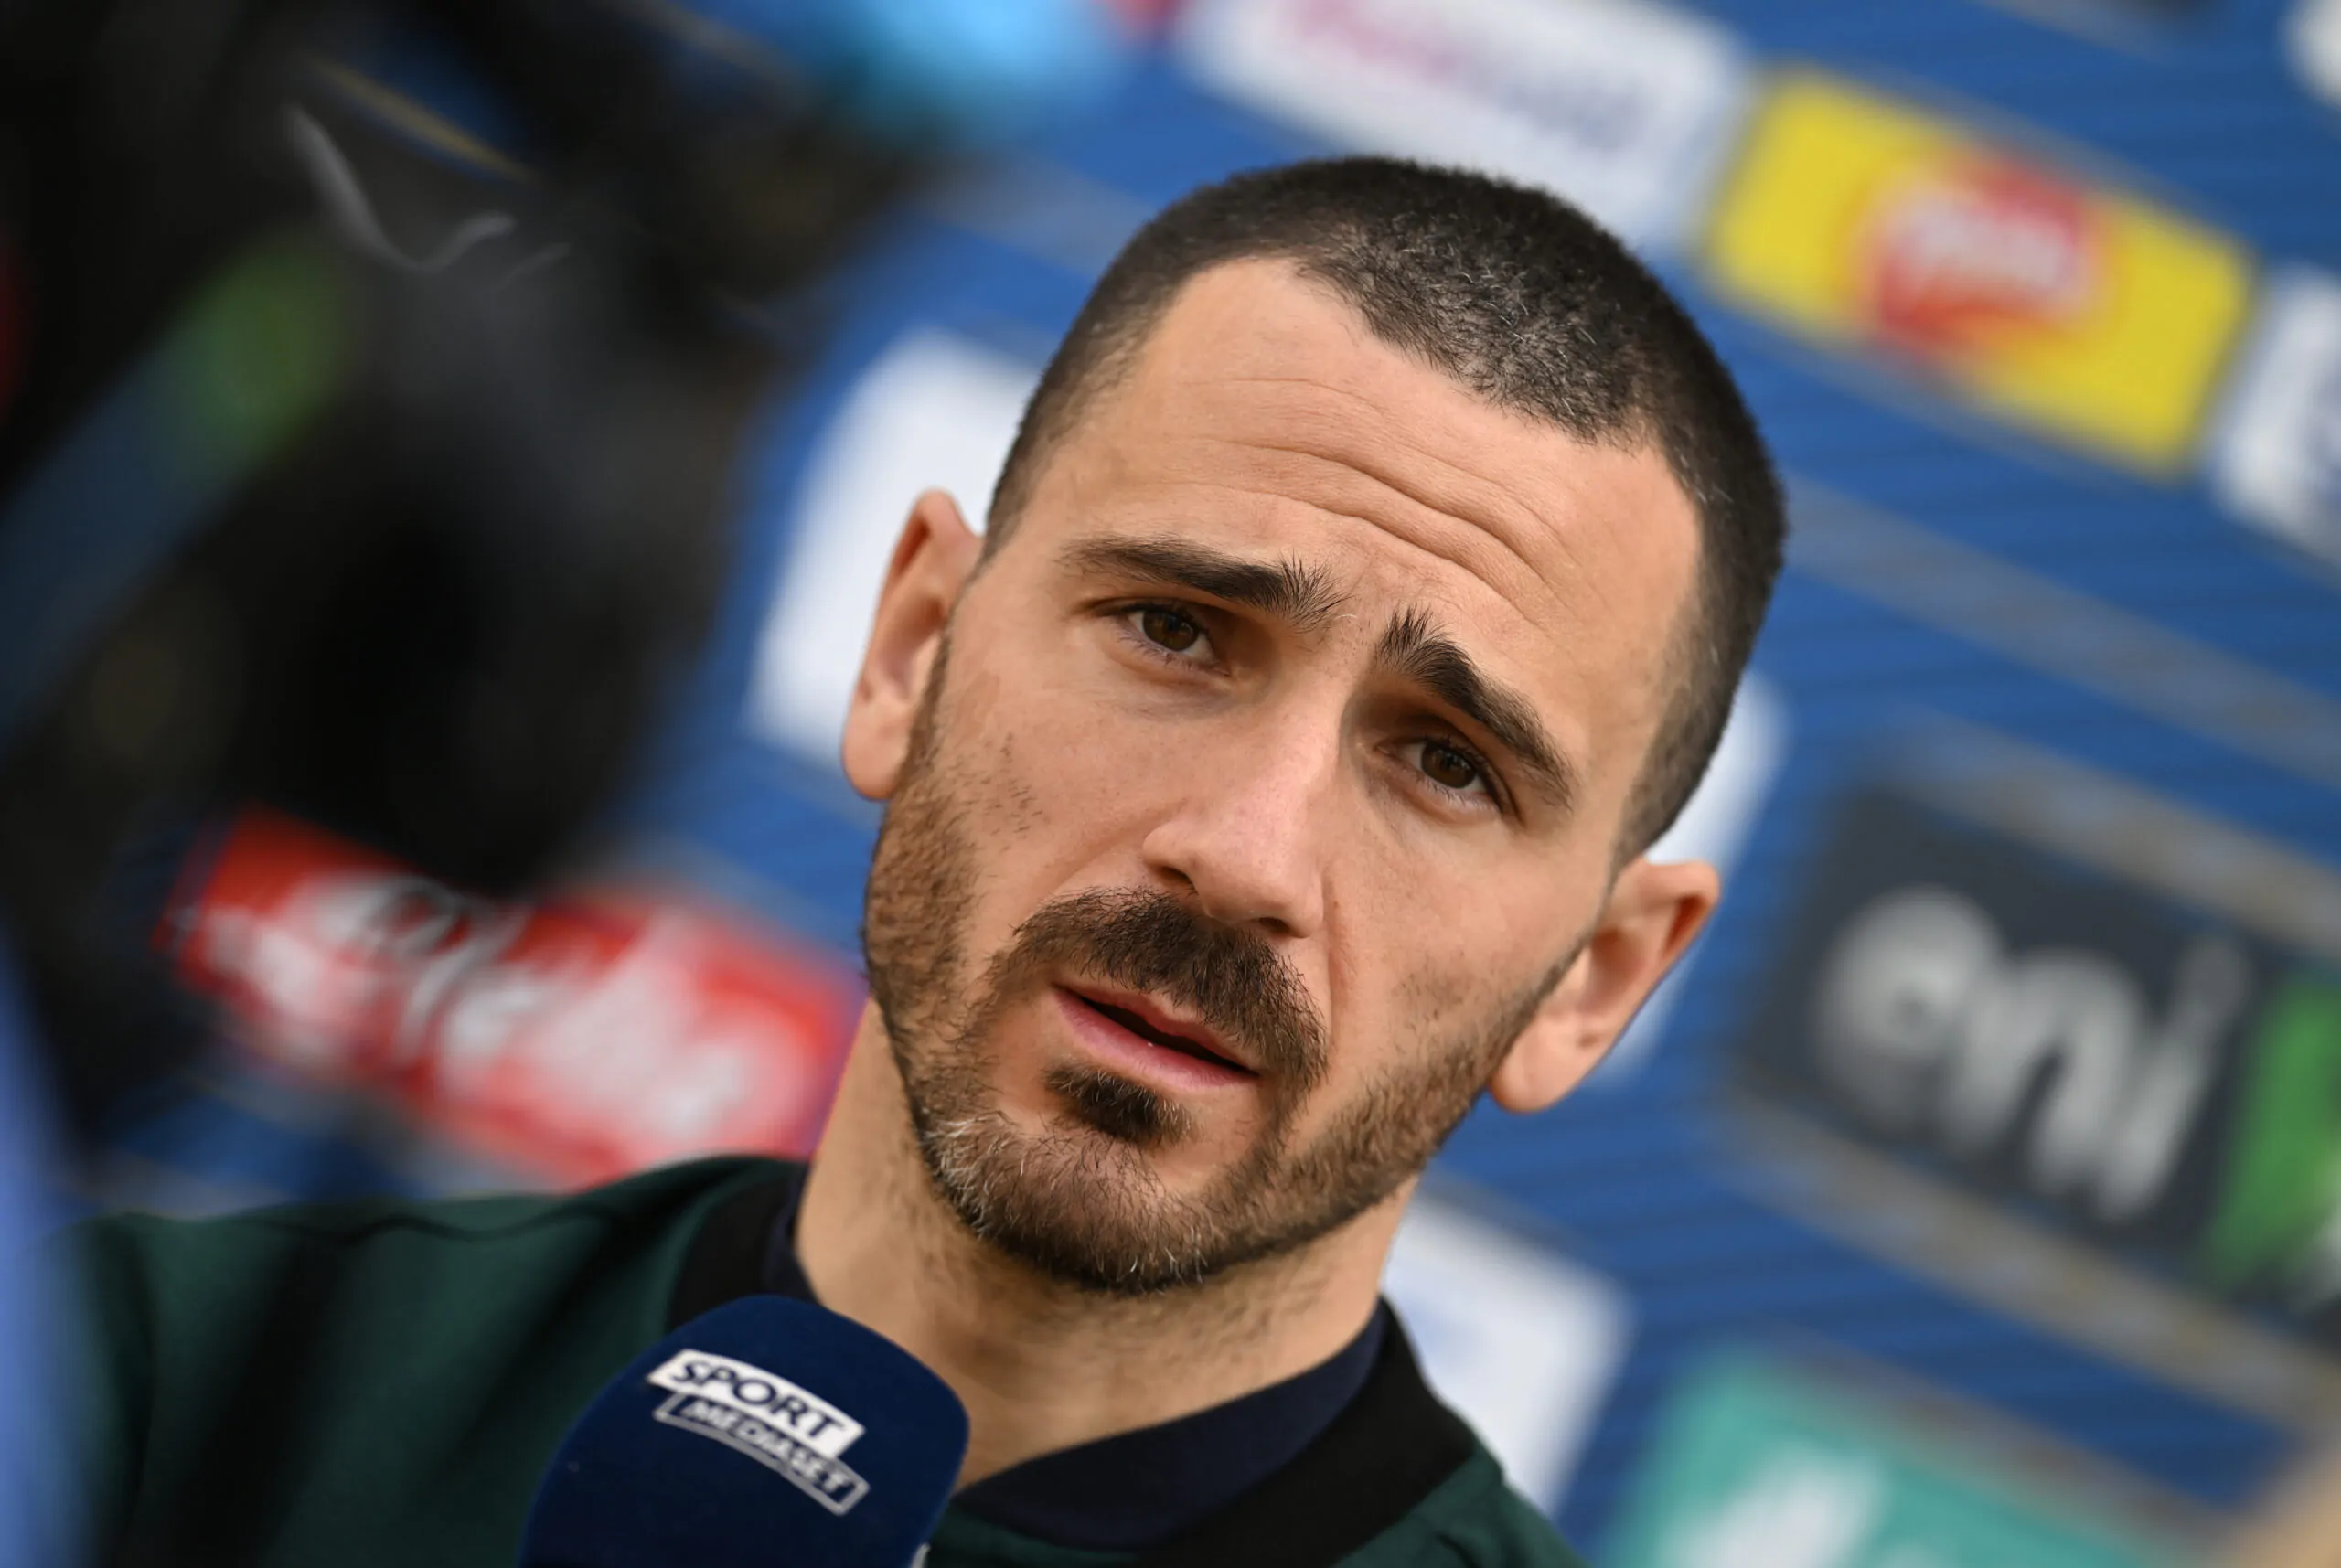 Juventus won’t respond directly to the latest words by Leonardo Bonucci directly, but they made it known that they disagree with his timetable.